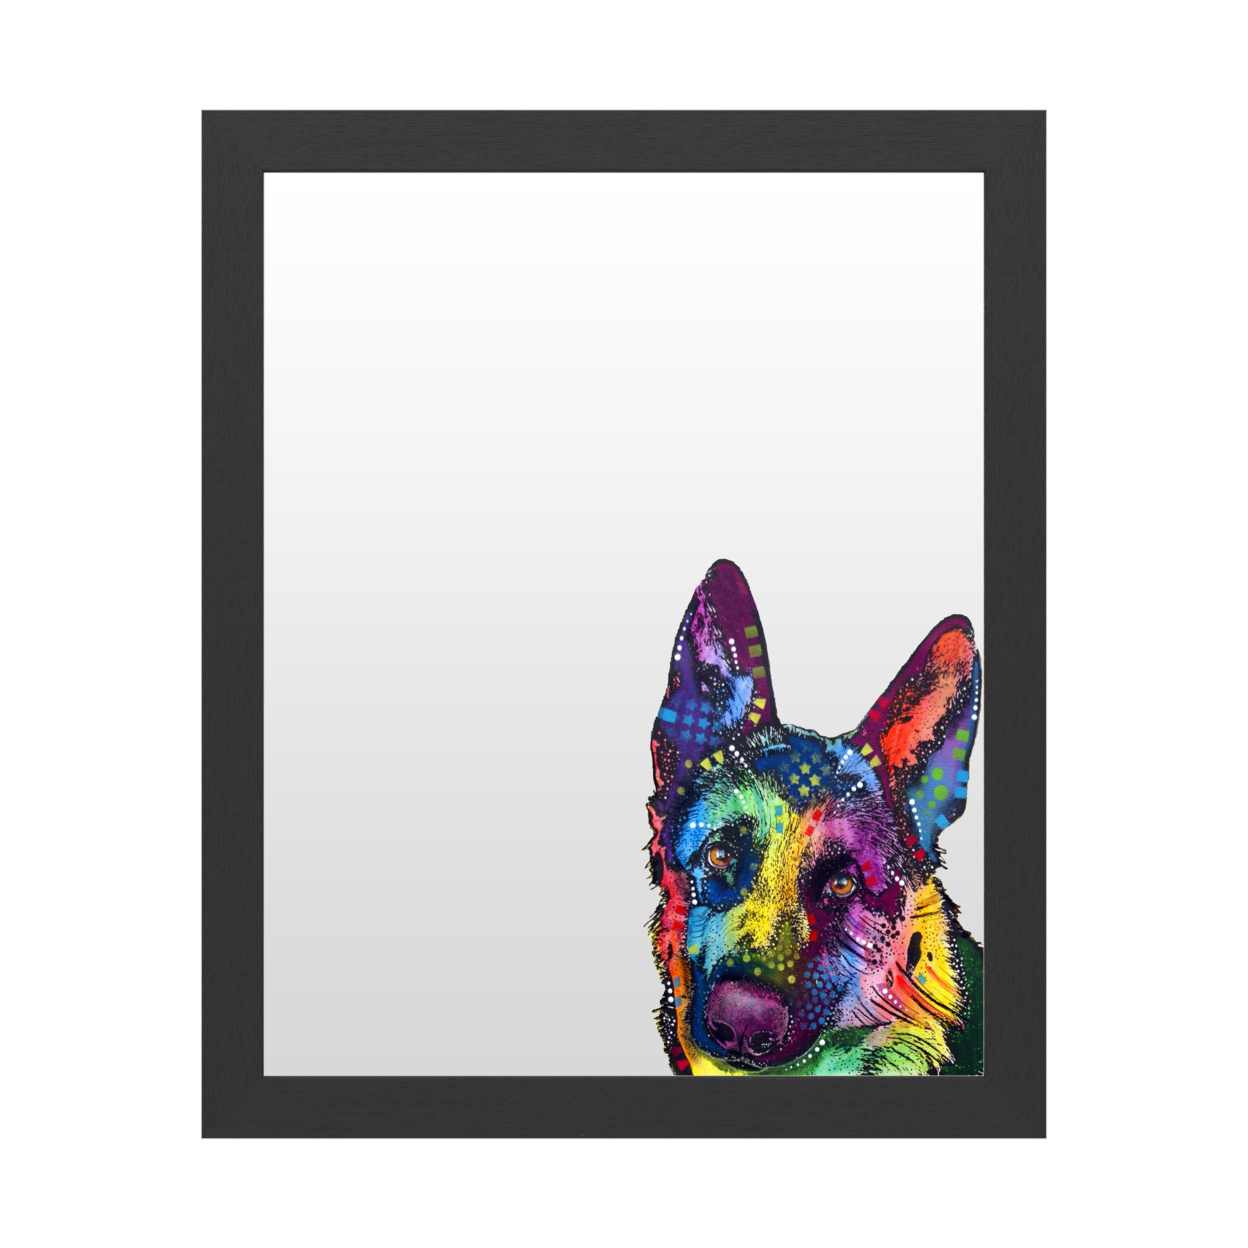 Dry Erase 16 X 20 Marker Board With Printed Artwork - Dean Russo German Shepherd White Board - Ready To Hang